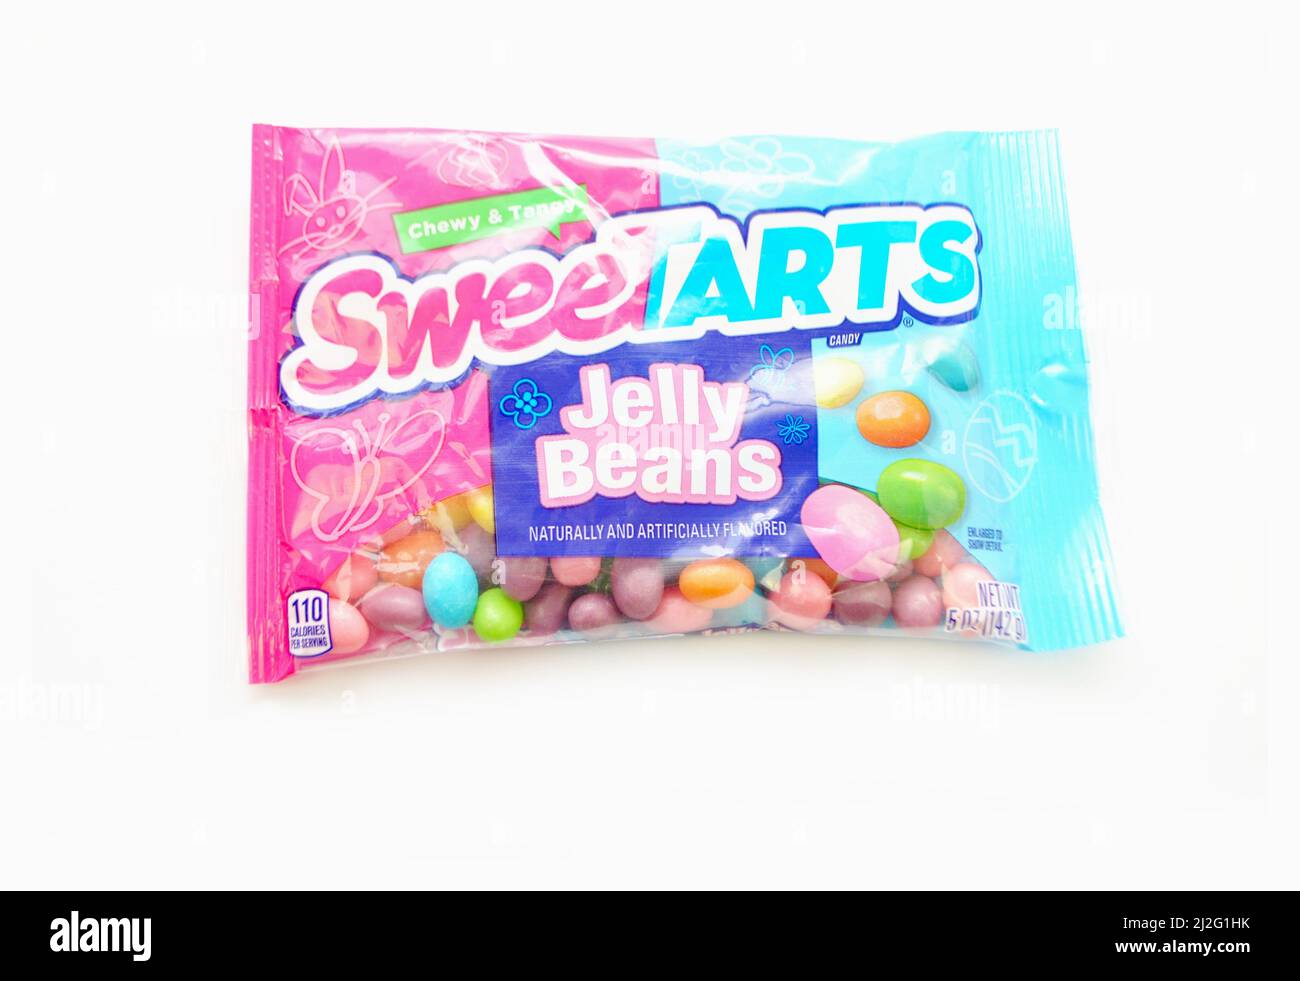 Marque Sweettarts - Candy Jelly Beans Banque D'Images